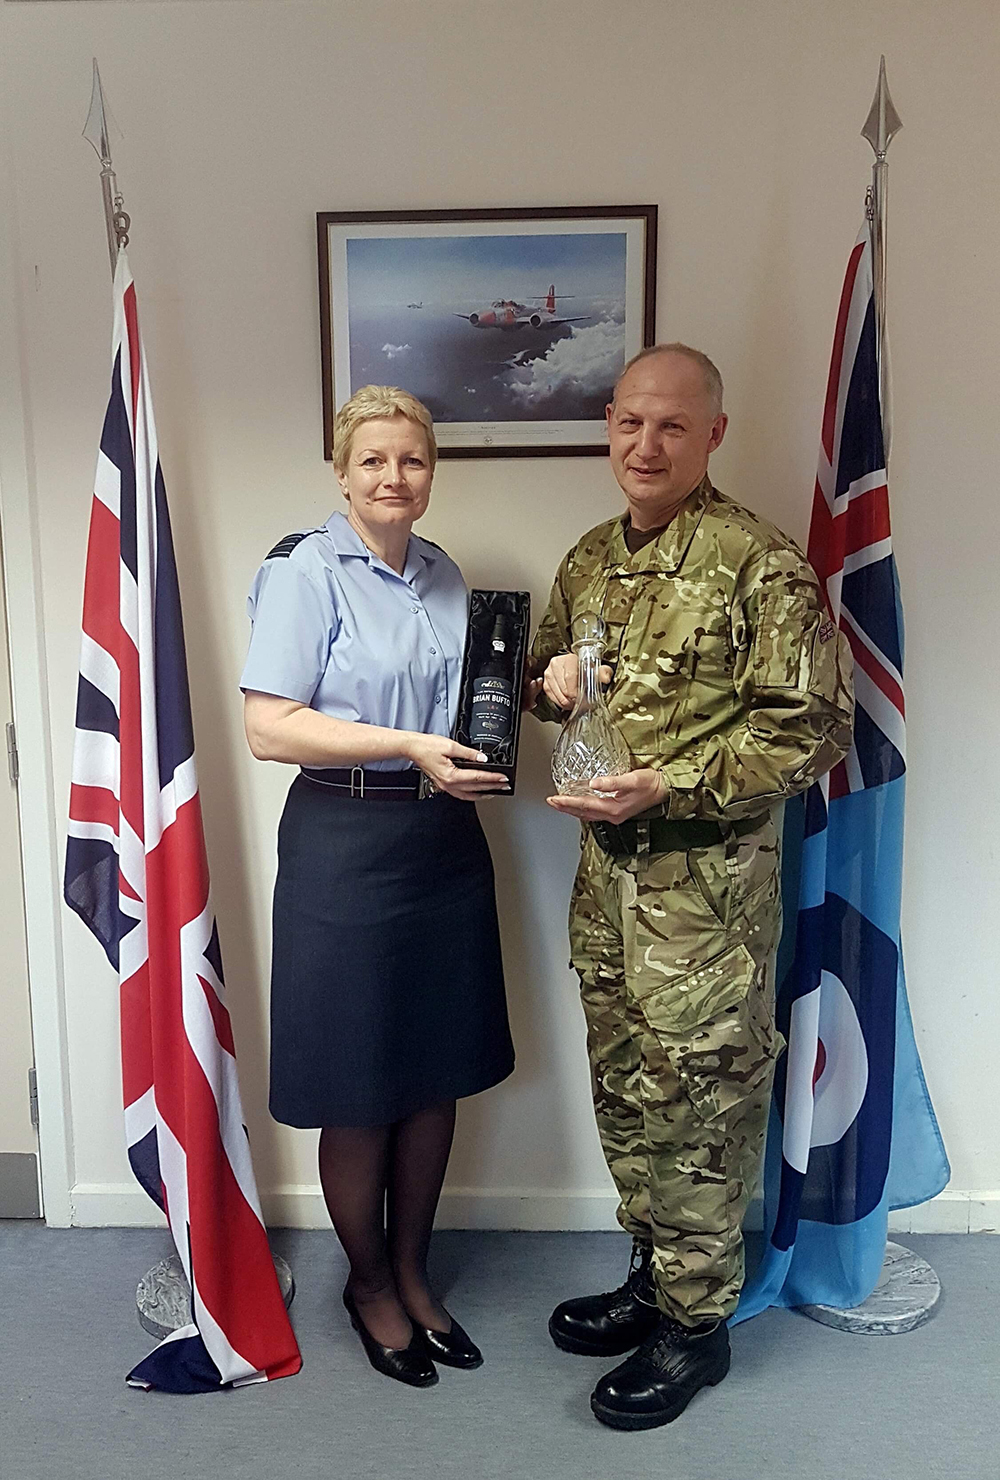 Wing Commander Bev Peart, Officer Commanding Number 4624 Squadron, presents a personalised bottle of port, a cut glass decanter and a certificate to Corporal Brian Bufton in 2017